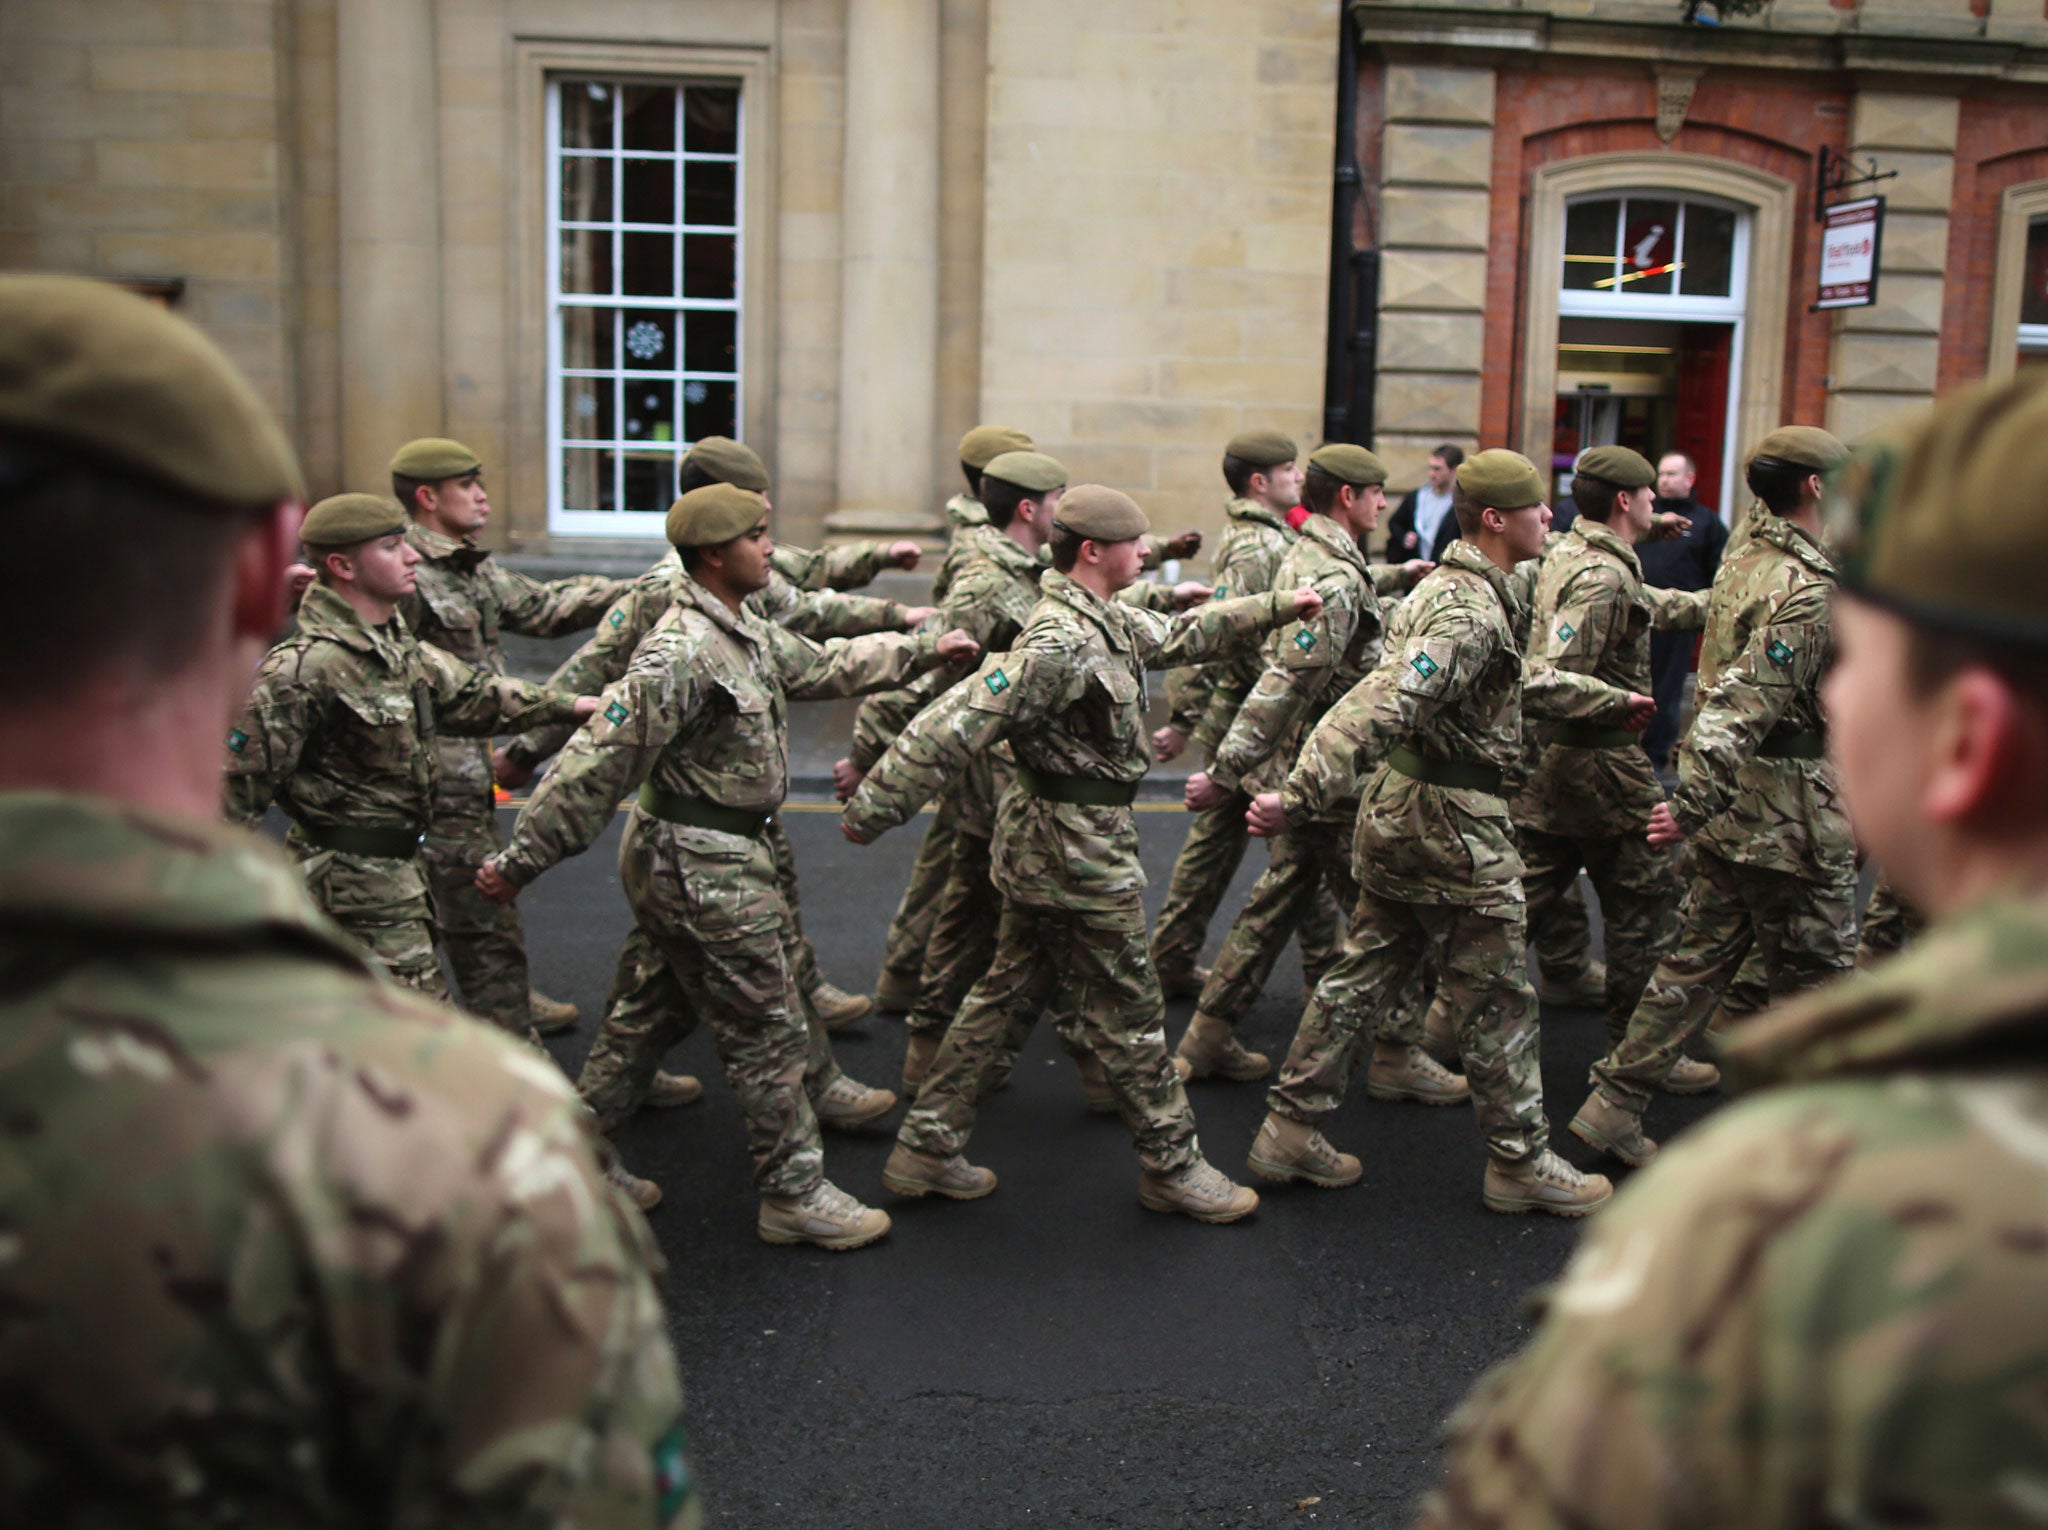 Soldiers from 3rd Battalion The Yorkshire Regiment march through the streets of York during a homecoming parade on December 5, 2012 in York, England.